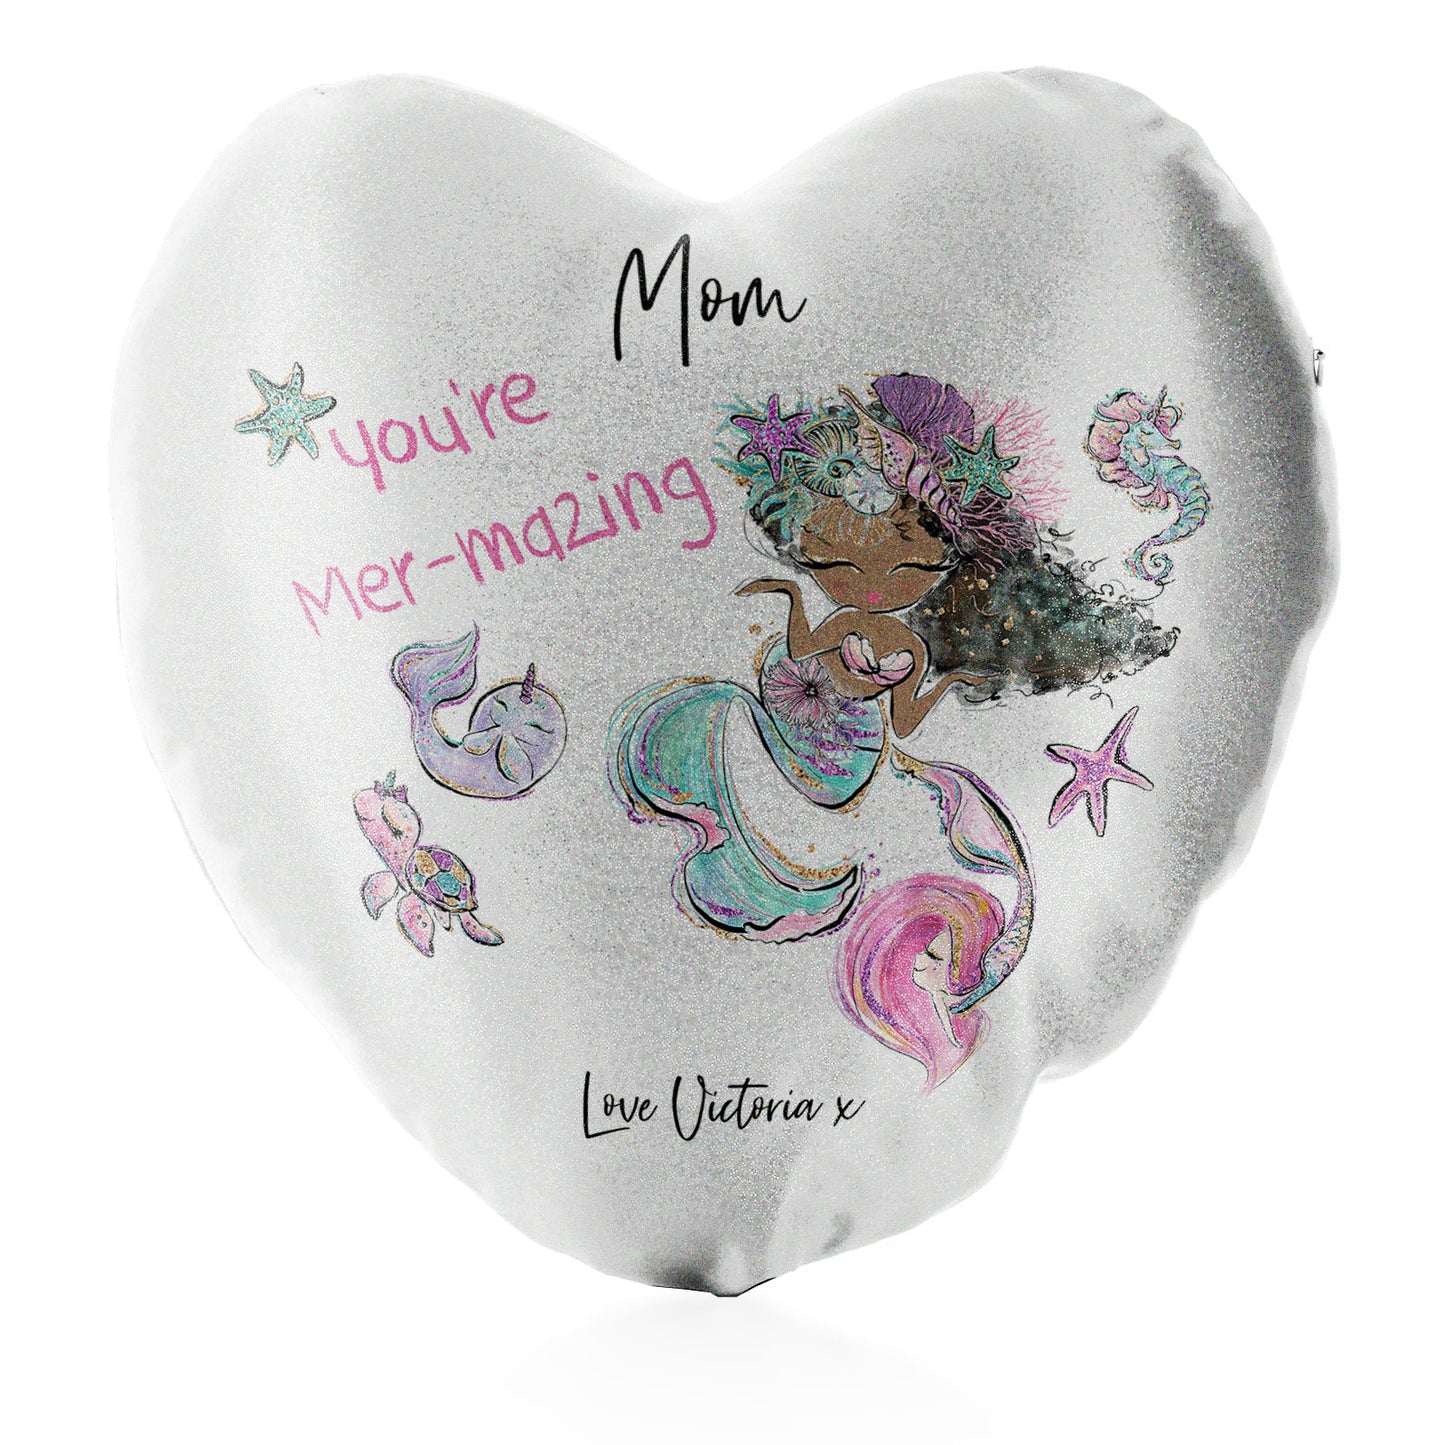 Personalised Glitter Heart Cushion with Stylish Text and Mermaid Love Message